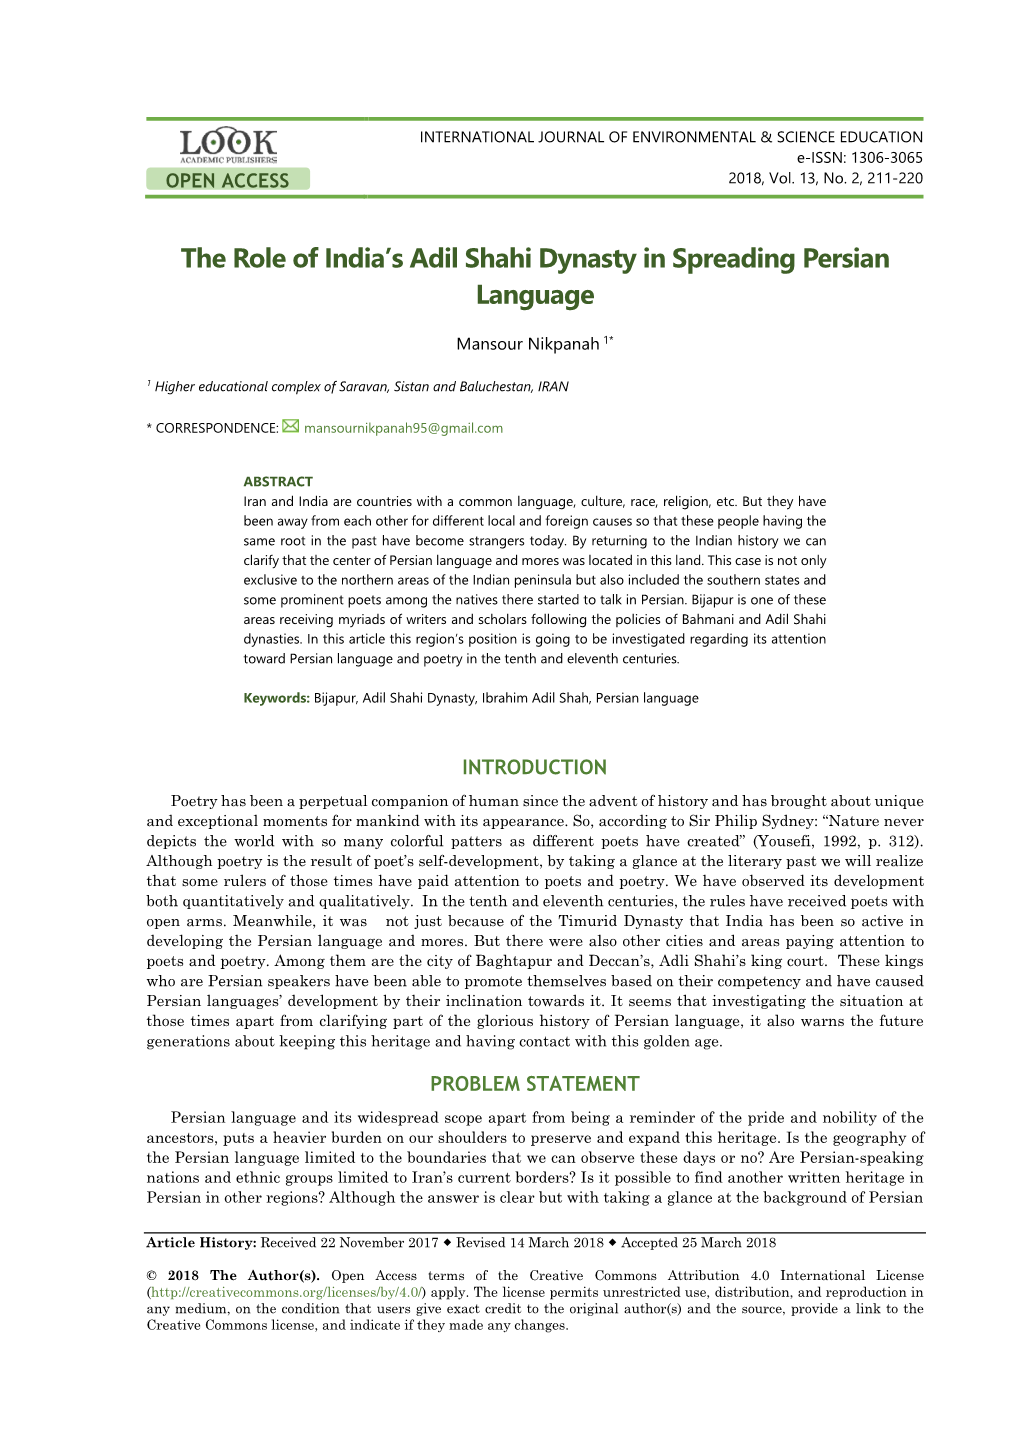 The Role of India's Adil Shahi Dynasty in Spreading Persian Language